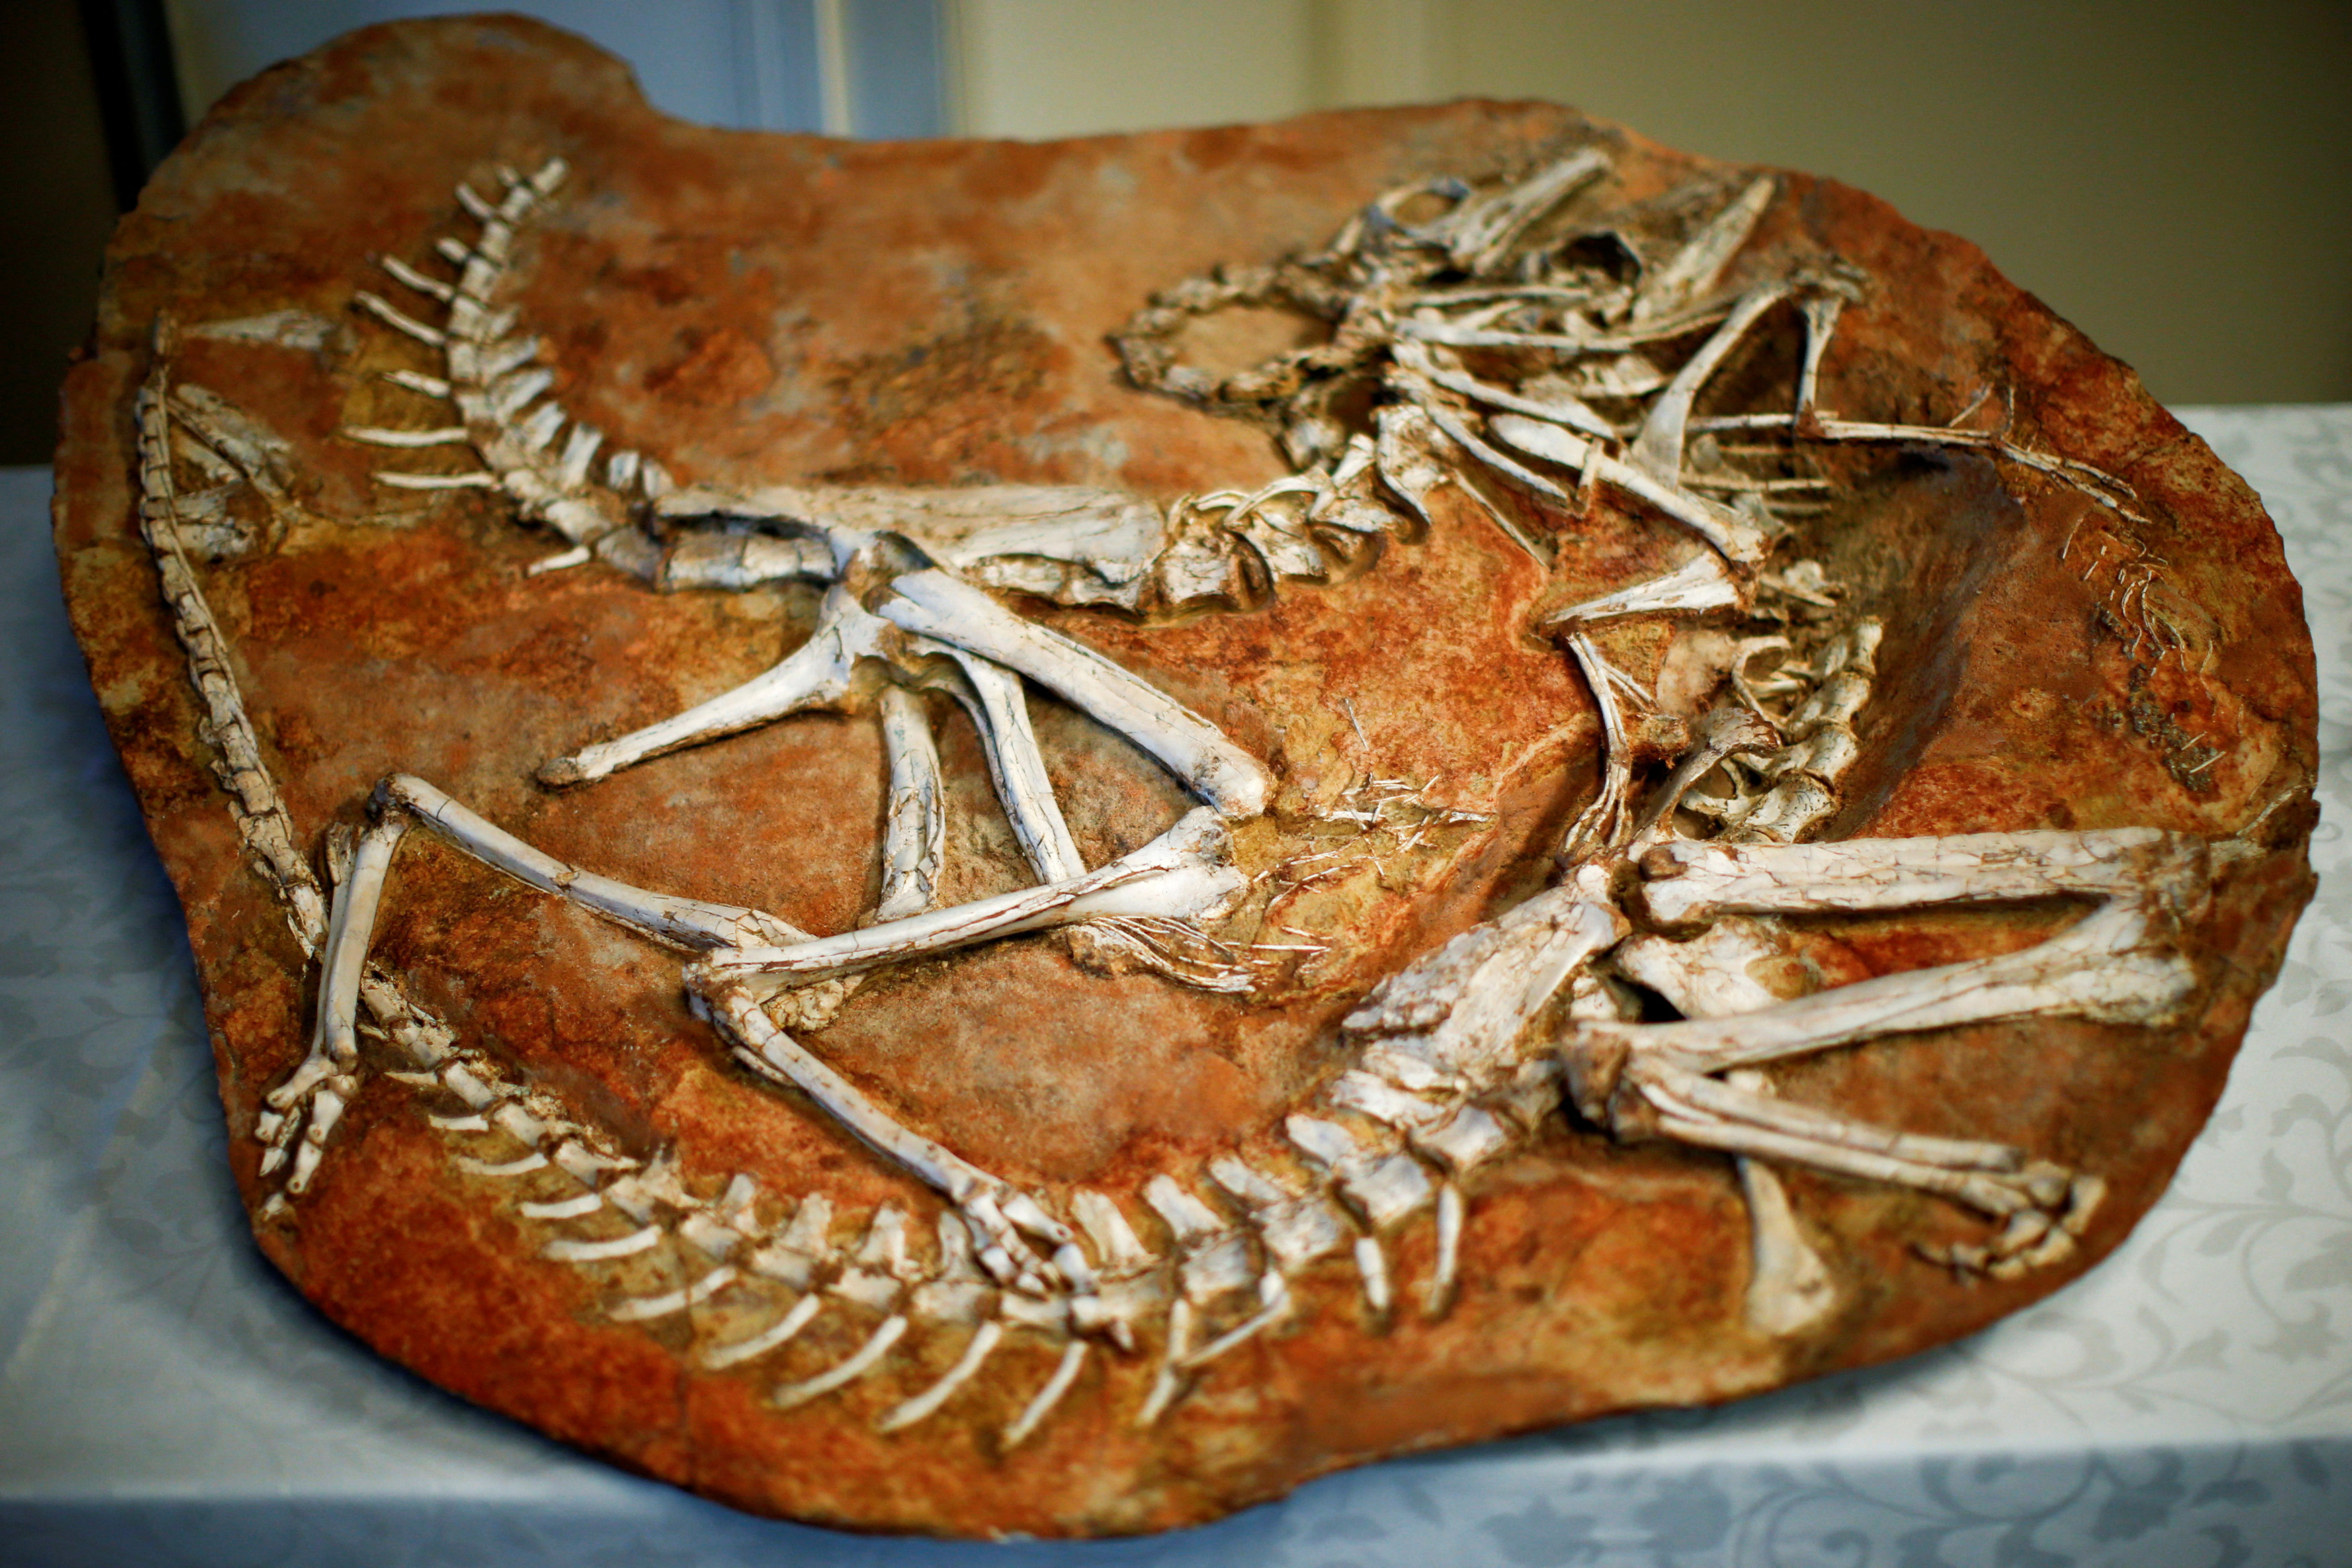 FILE PHOTO: Two Gallimimus dinosaur skeletons are on display during a repatriation ceremony at the United States Attorney's Office of Southern District in New York